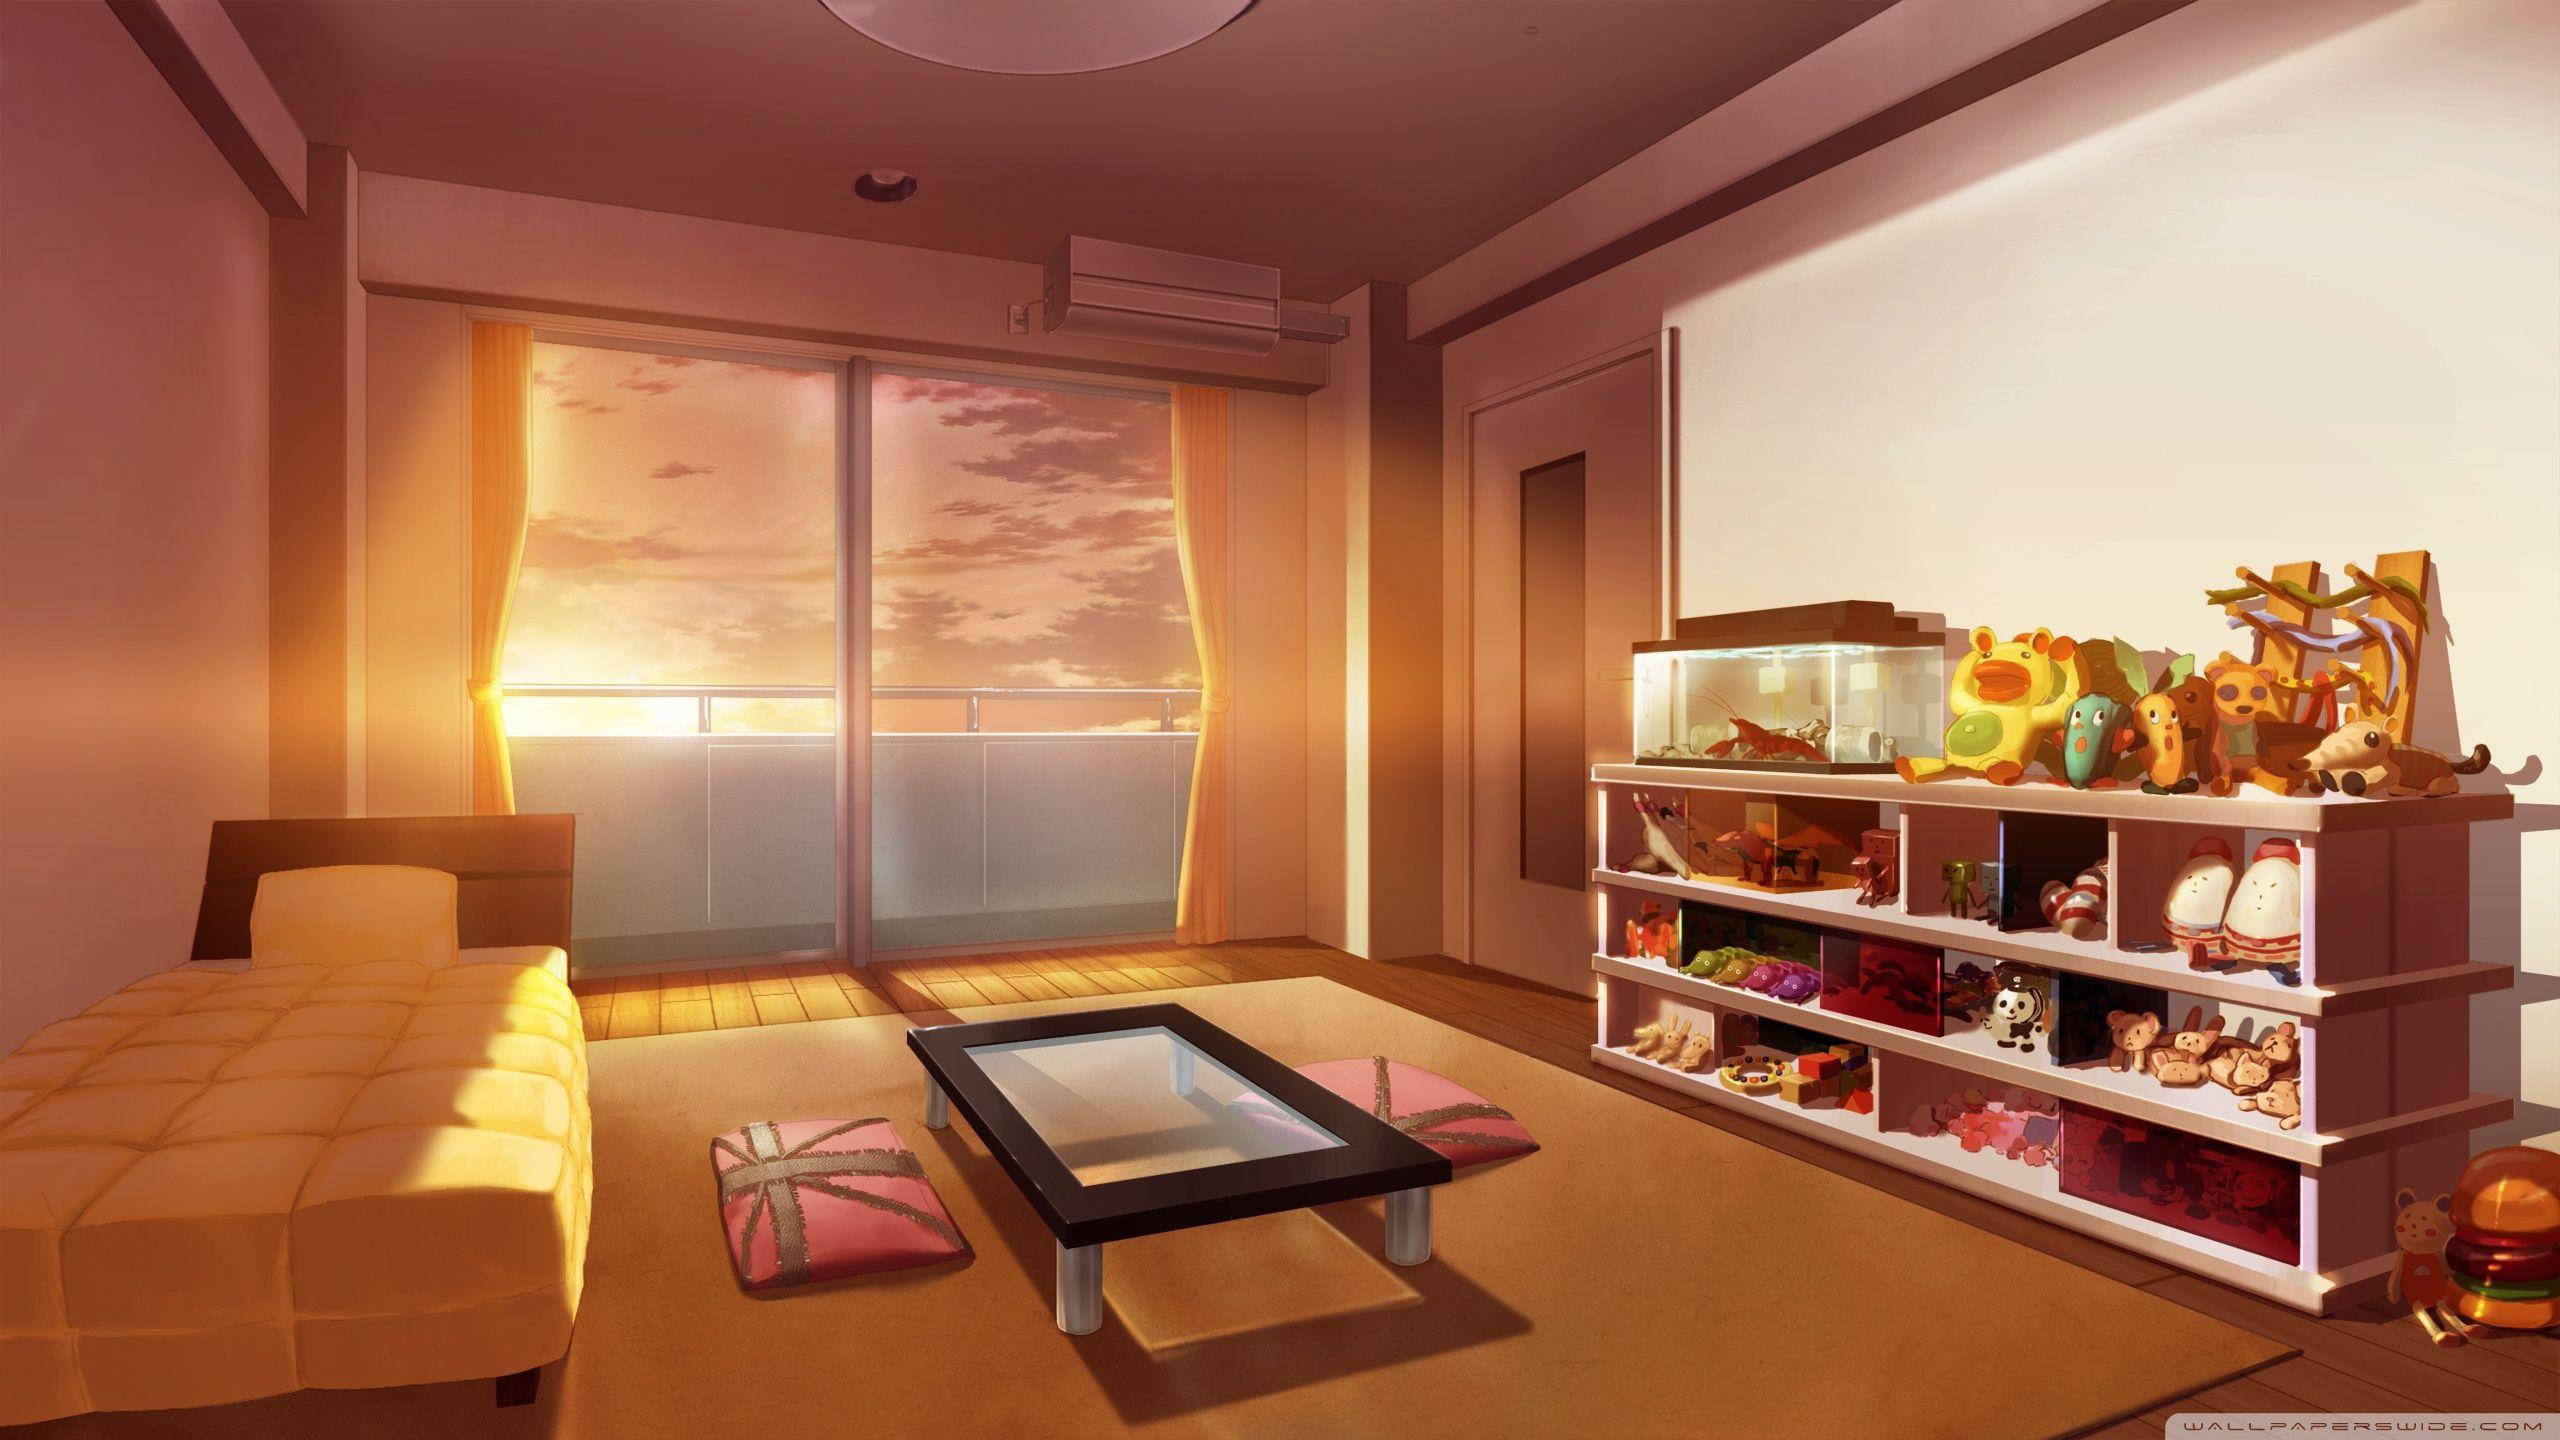 Anime Rooms Wallpapers Wallpaper Cave Aesthetic apartment anime living room background. anime rooms wallpapers wallpaper cave